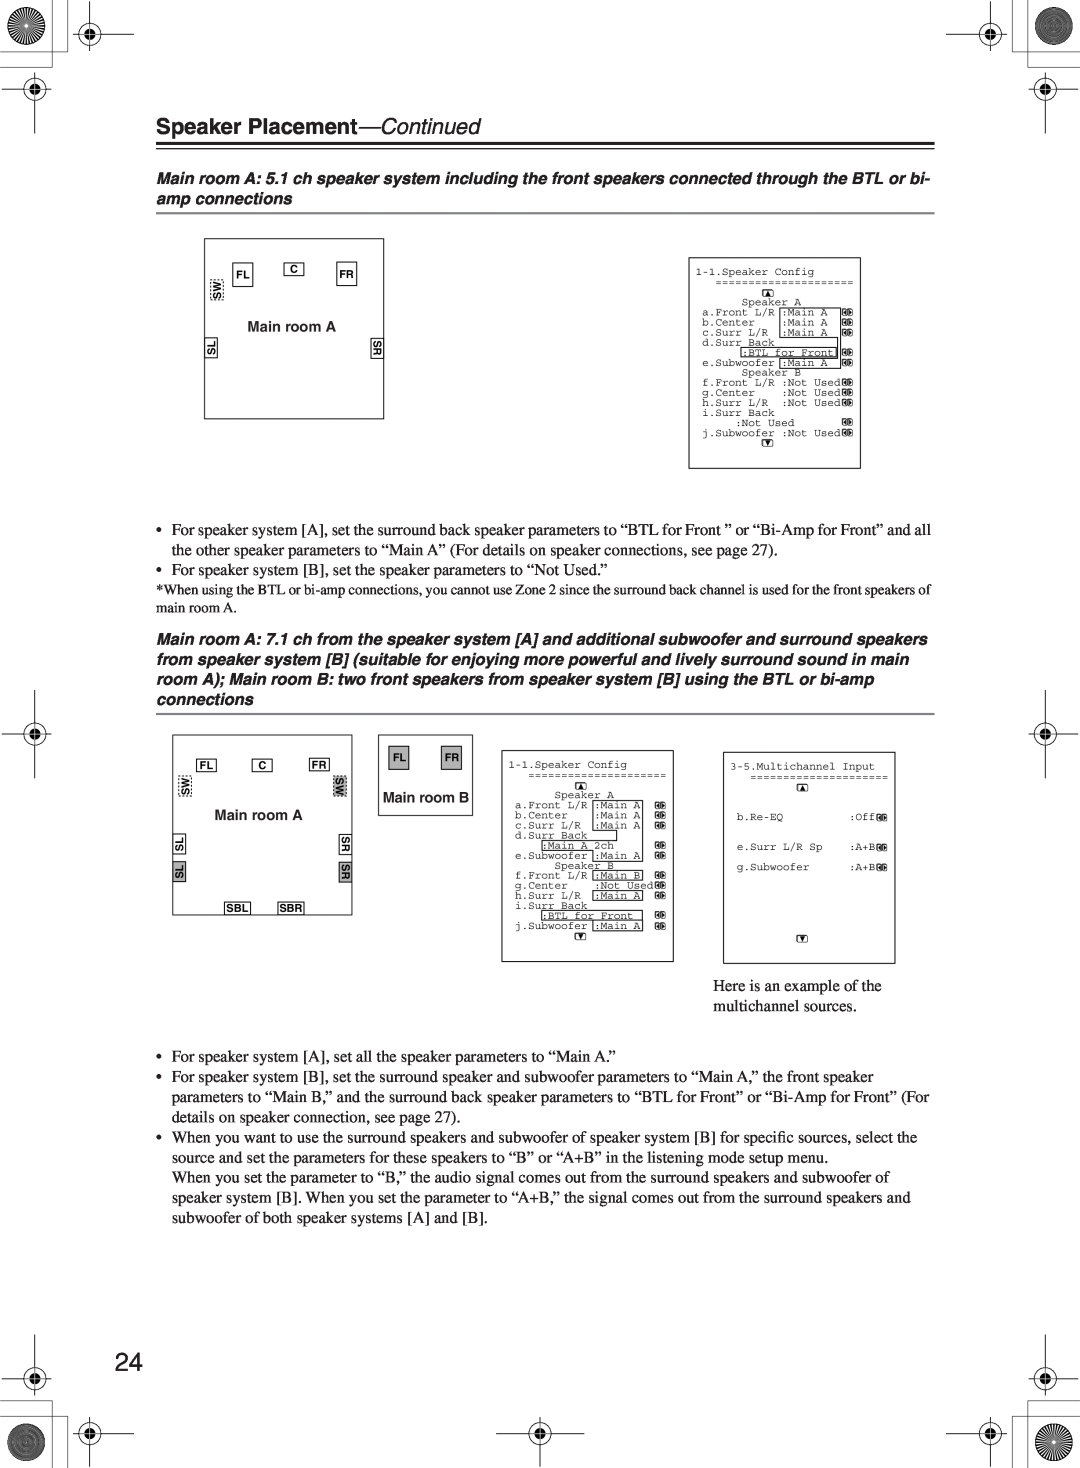 Onkyo TX-NR1000 instruction manual Speaker Placement—Continued, Here is an example of the multichannel sources 